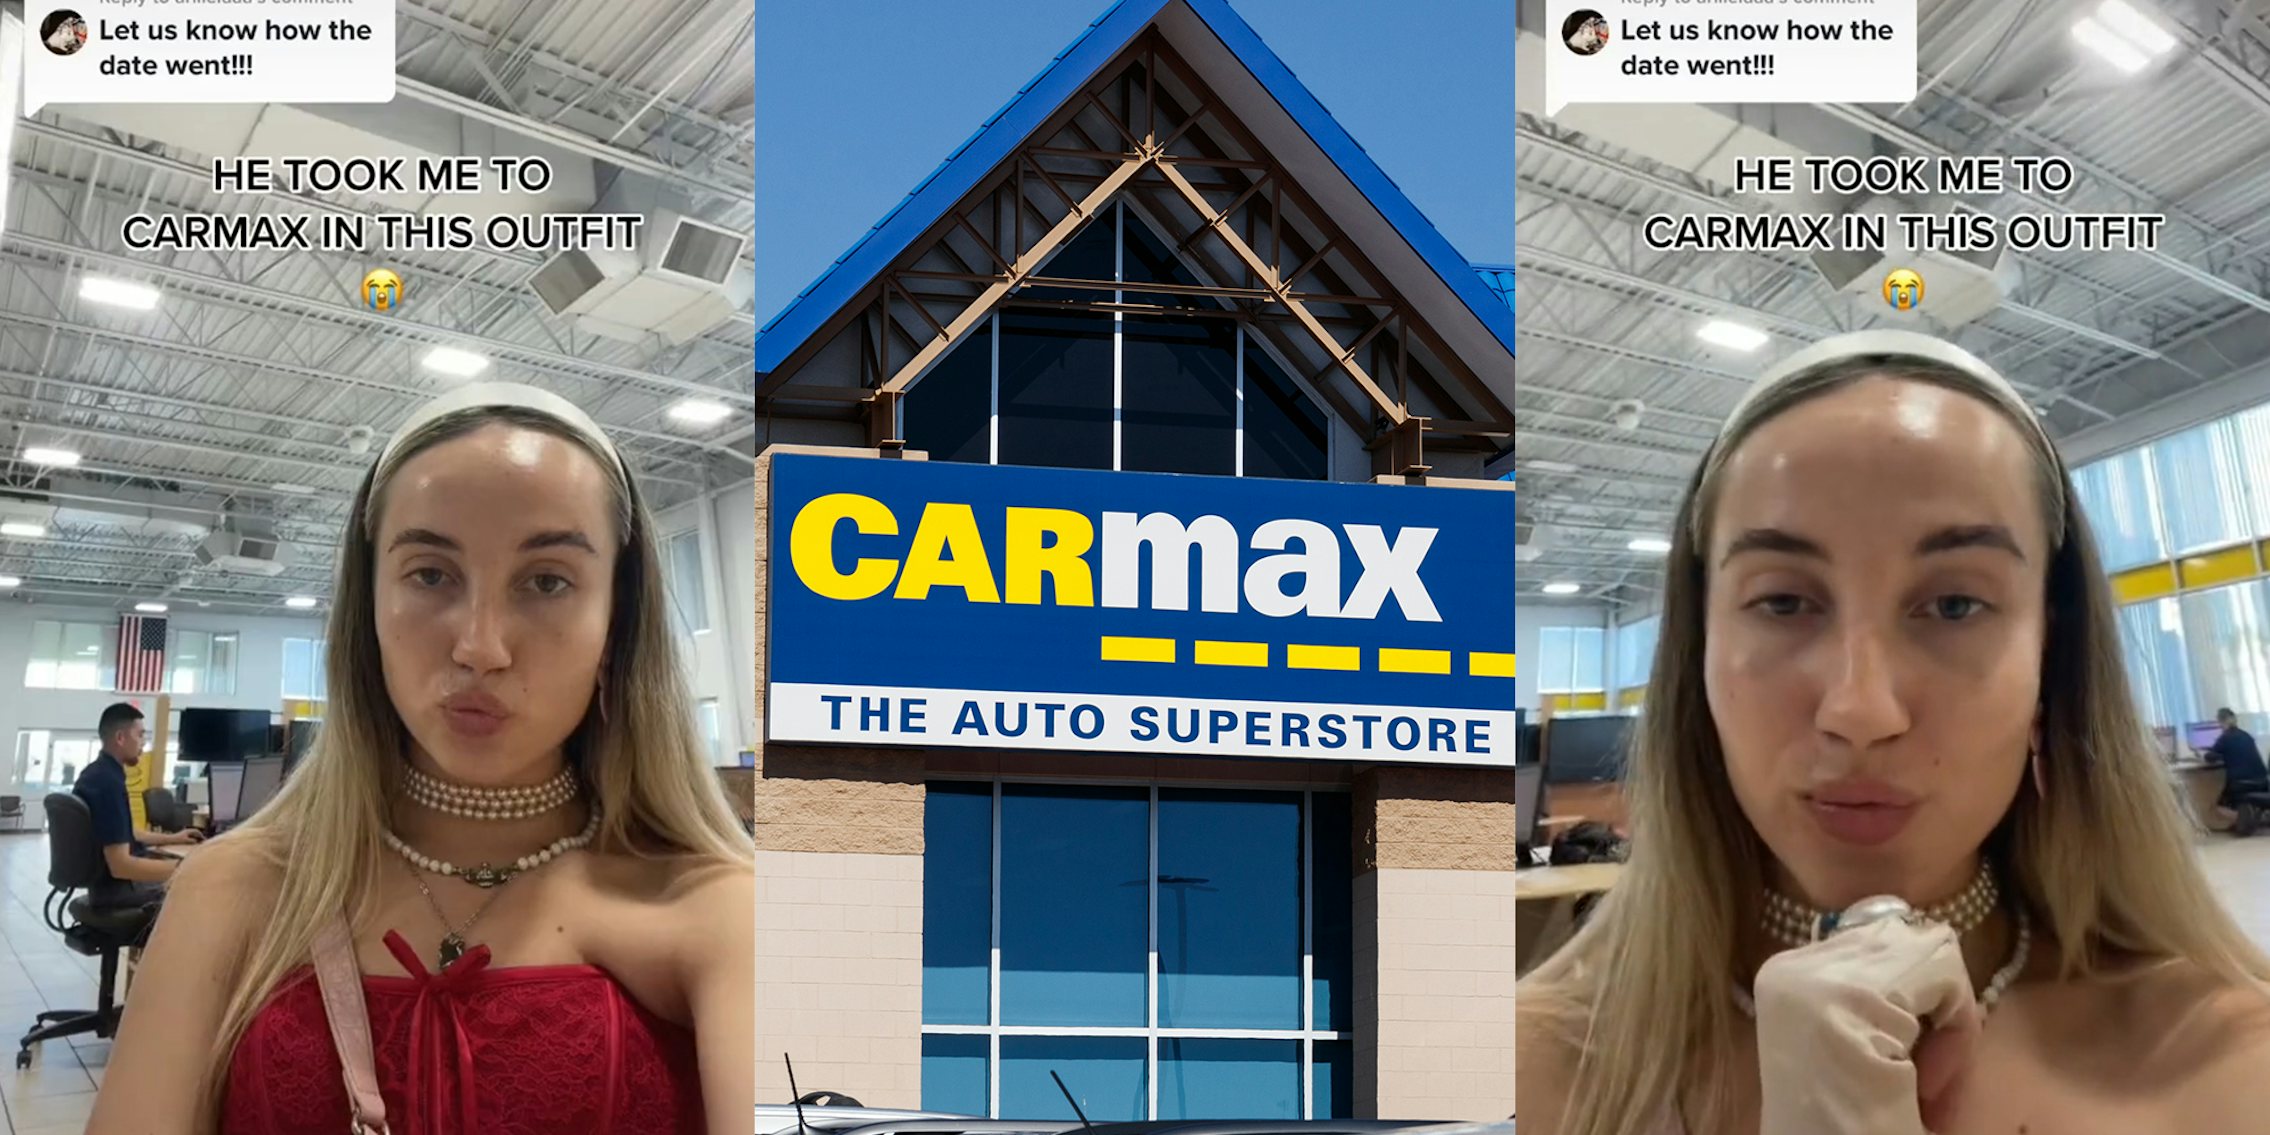 young woman dressed up in warehouse with captions 'let us know how the date went!' and 'he took me to carmax in this outfit' (l&r) carmax the auto superstore sign (c)